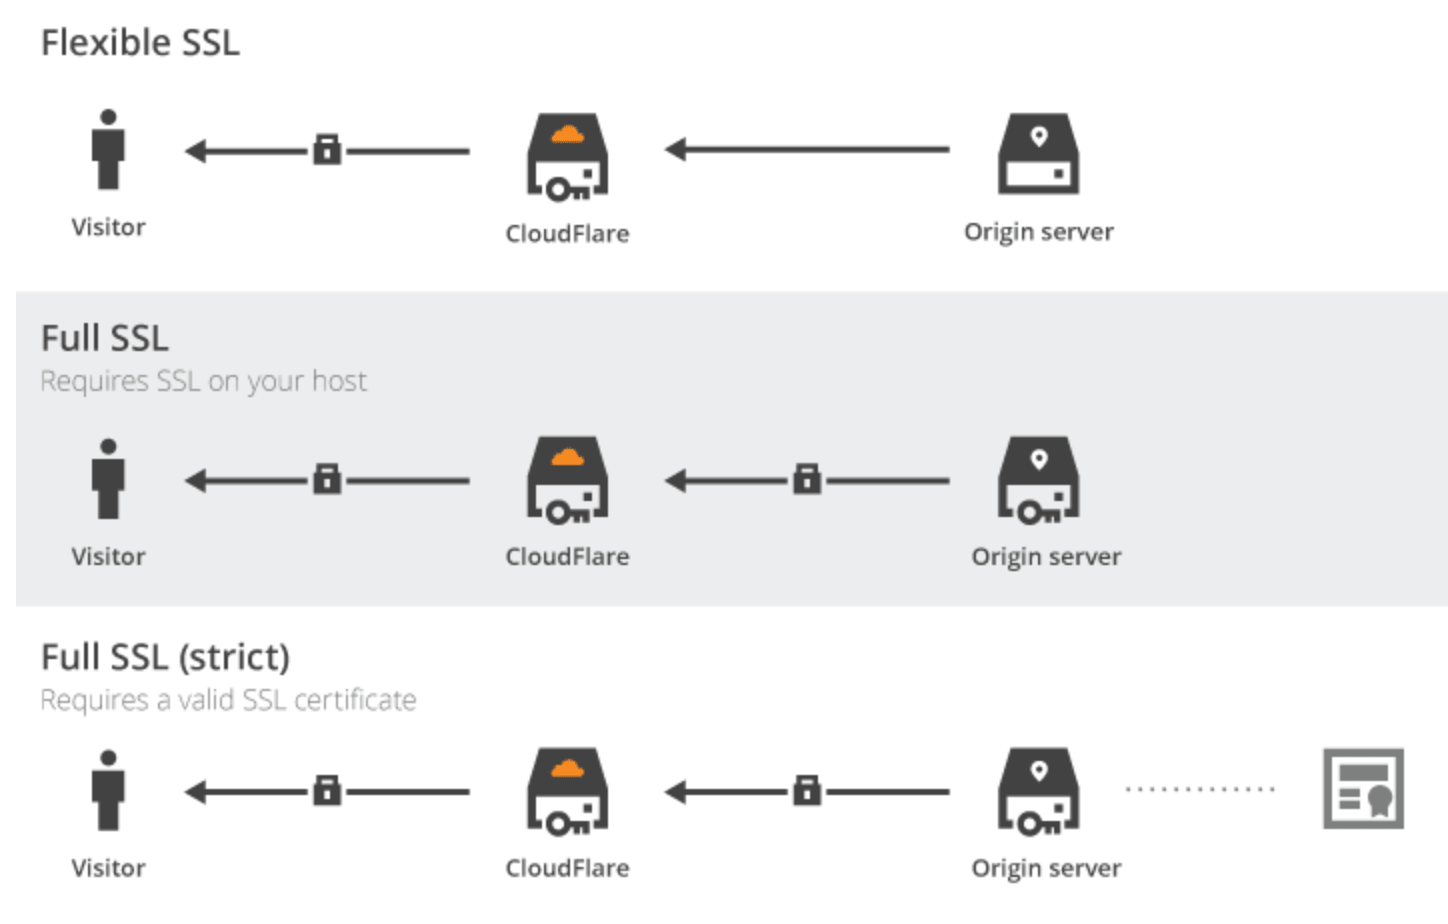 cloudflare flexible full strict differences